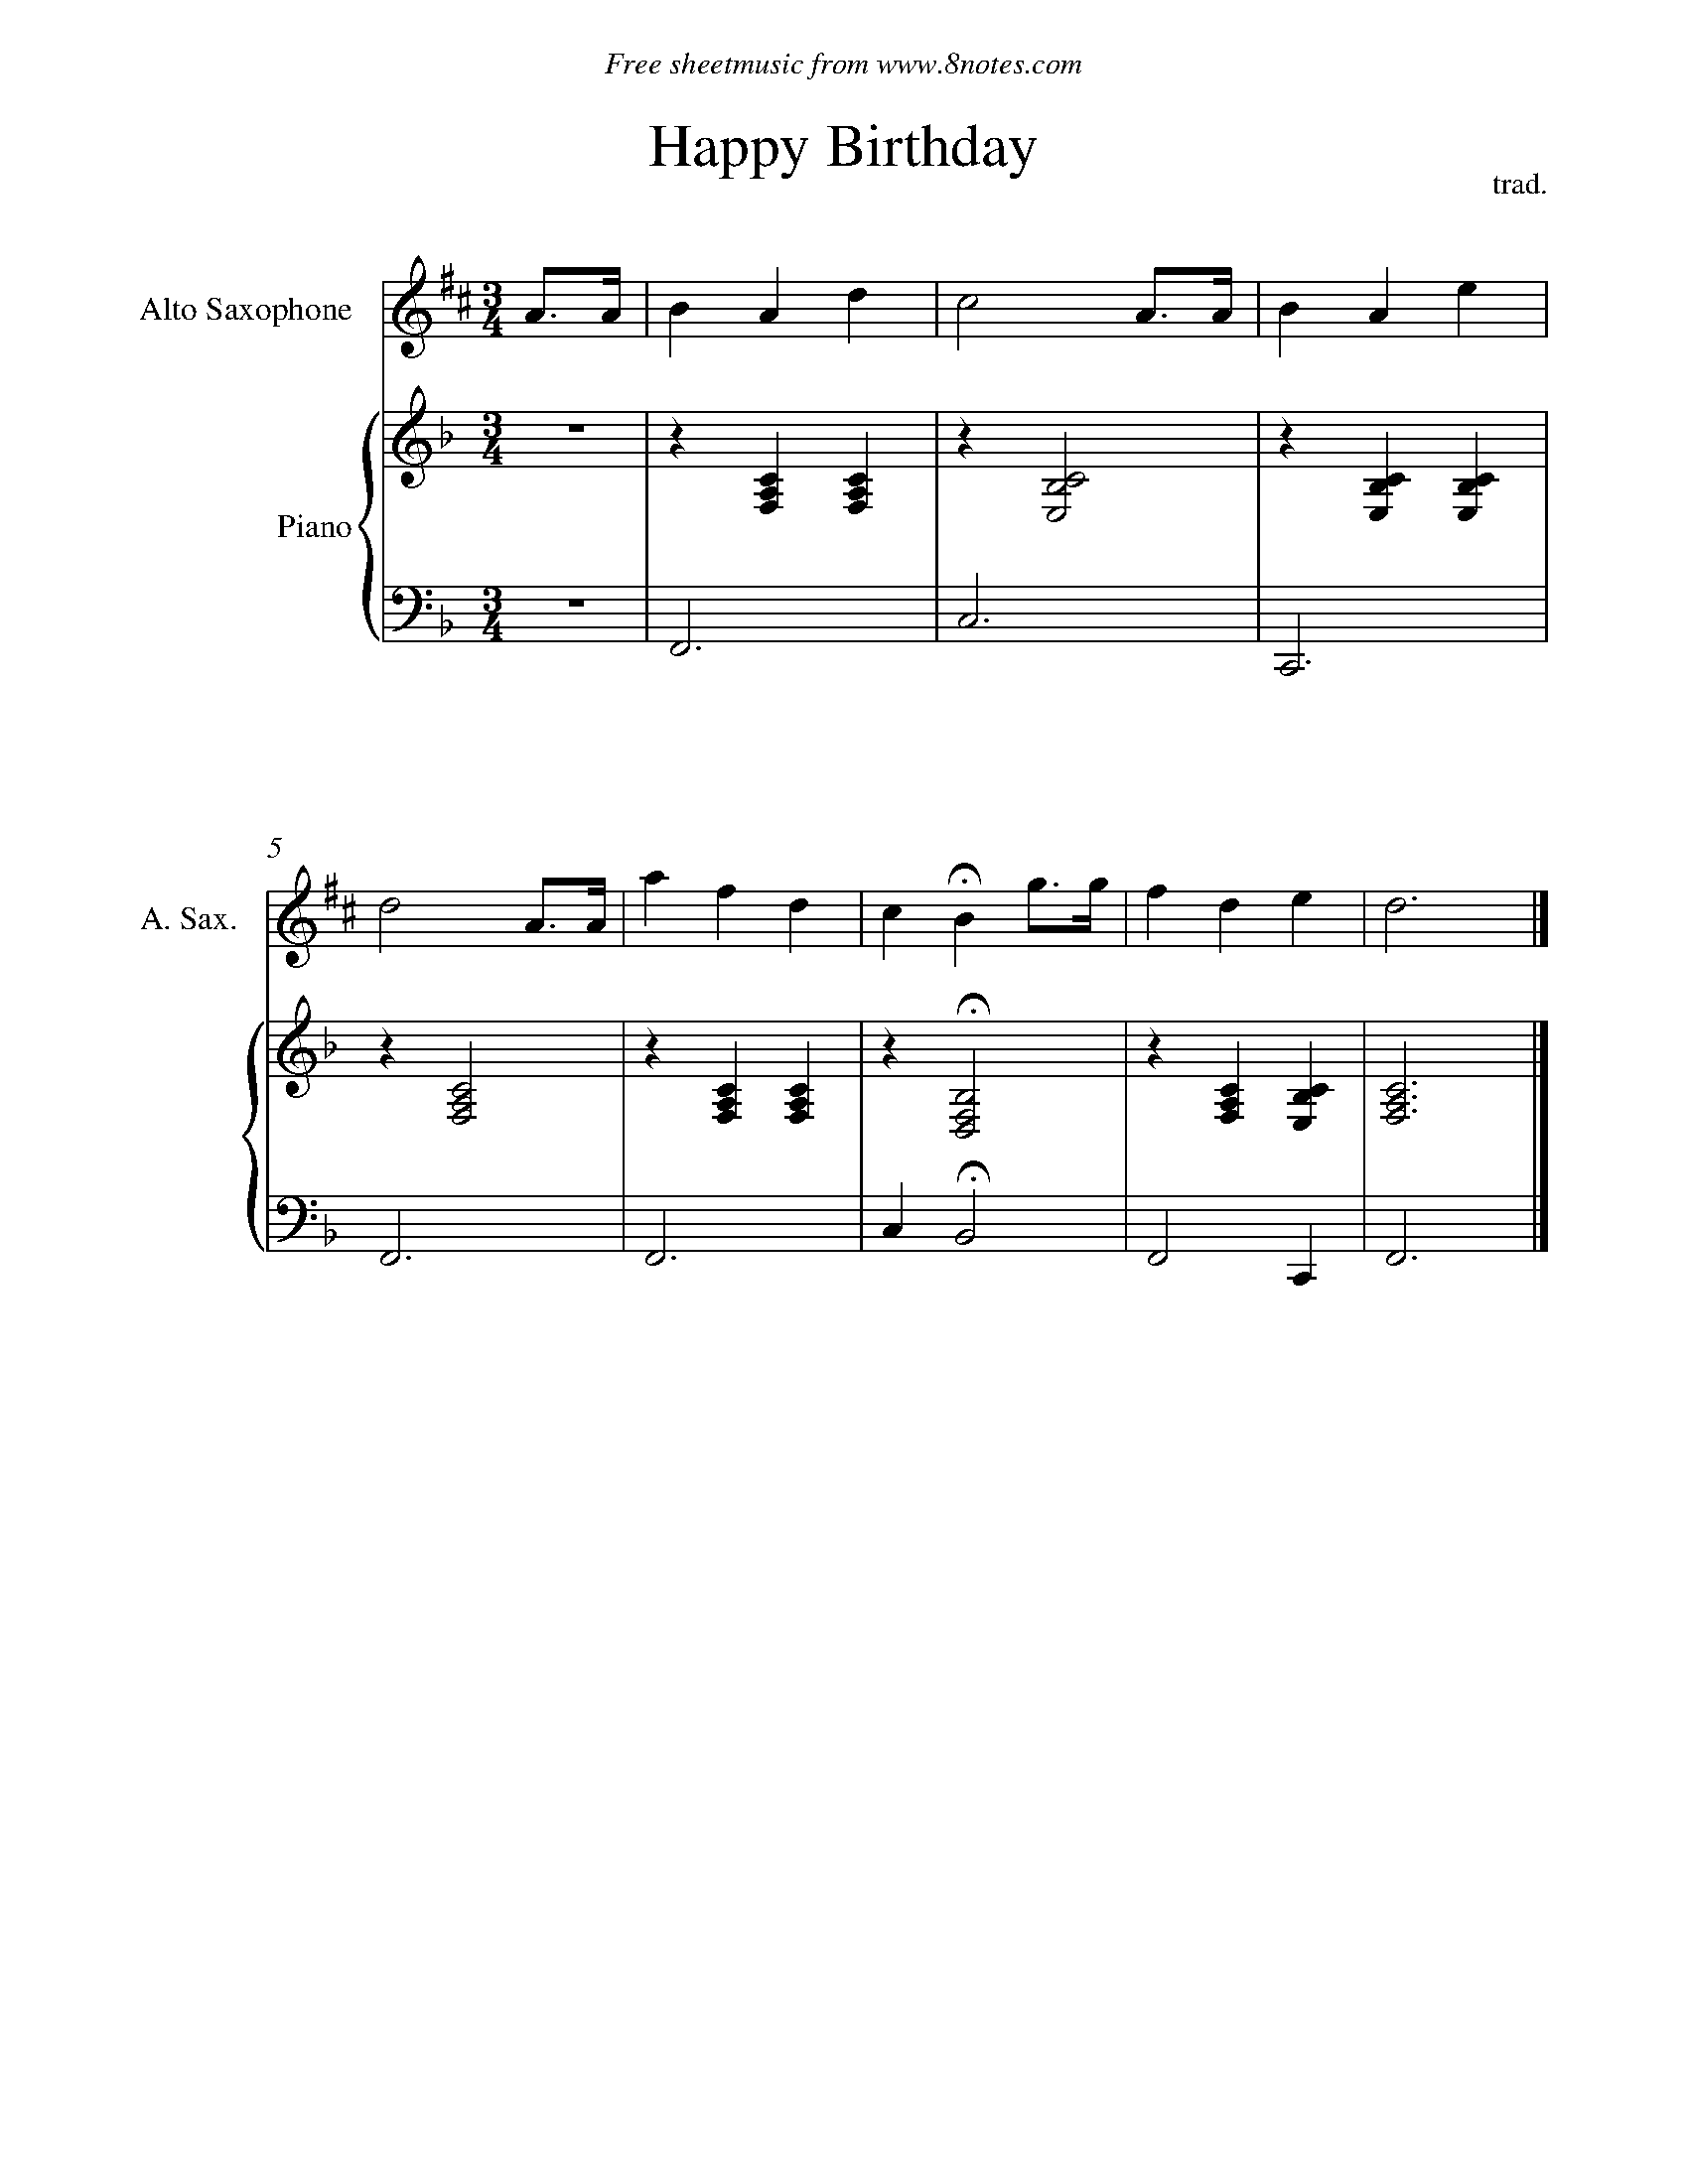 Happy Birthday Sheet music for Saxophone - 8notes.com